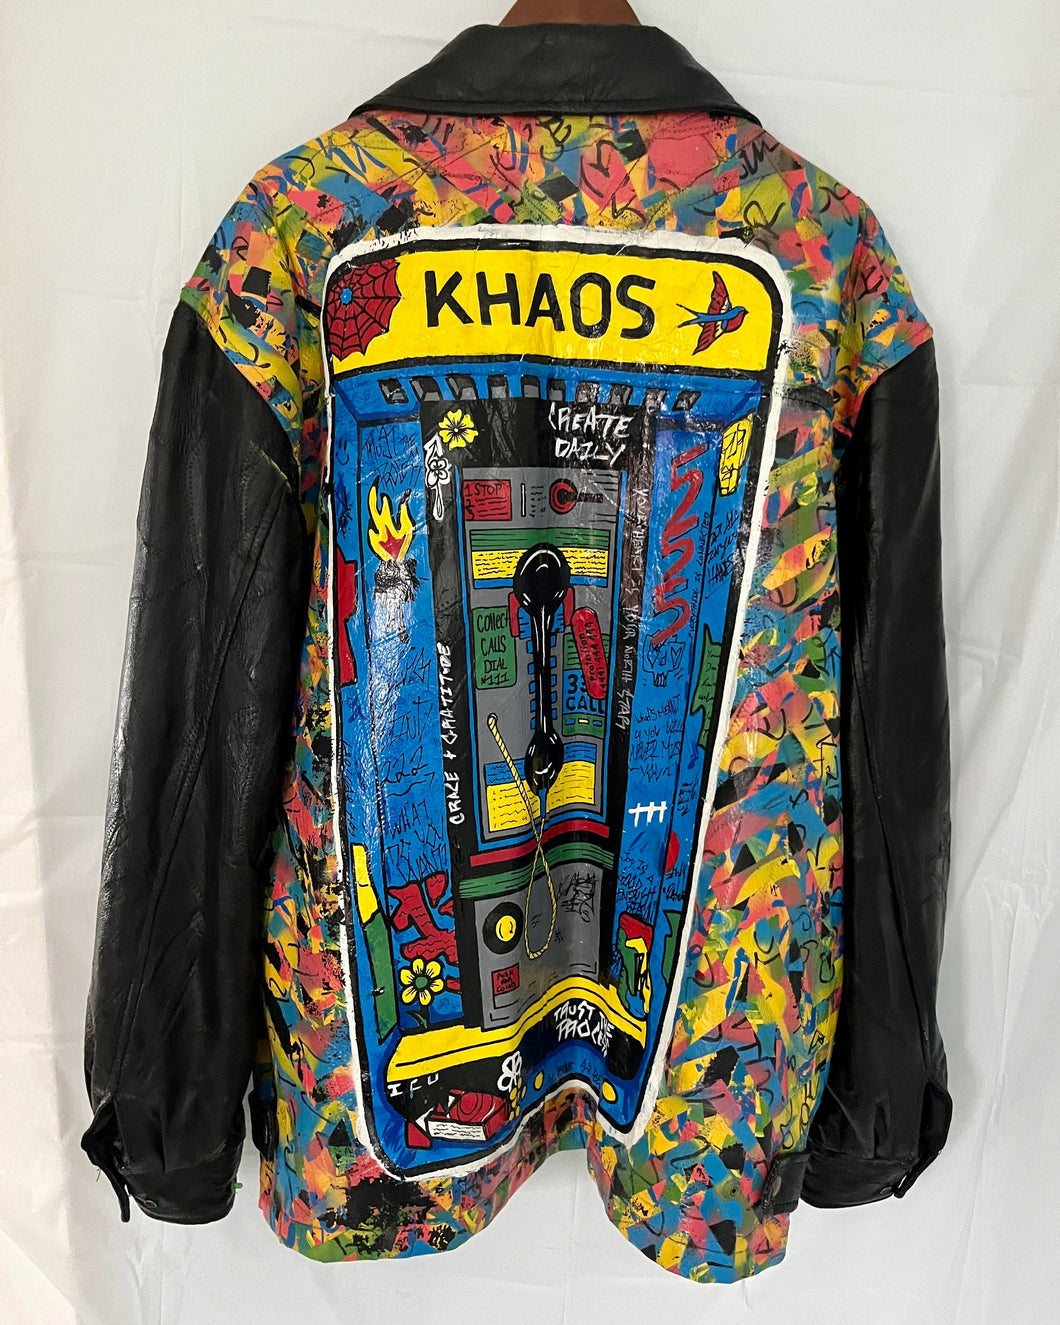 Your Future Is Calling - Khaos Jacket 3/8